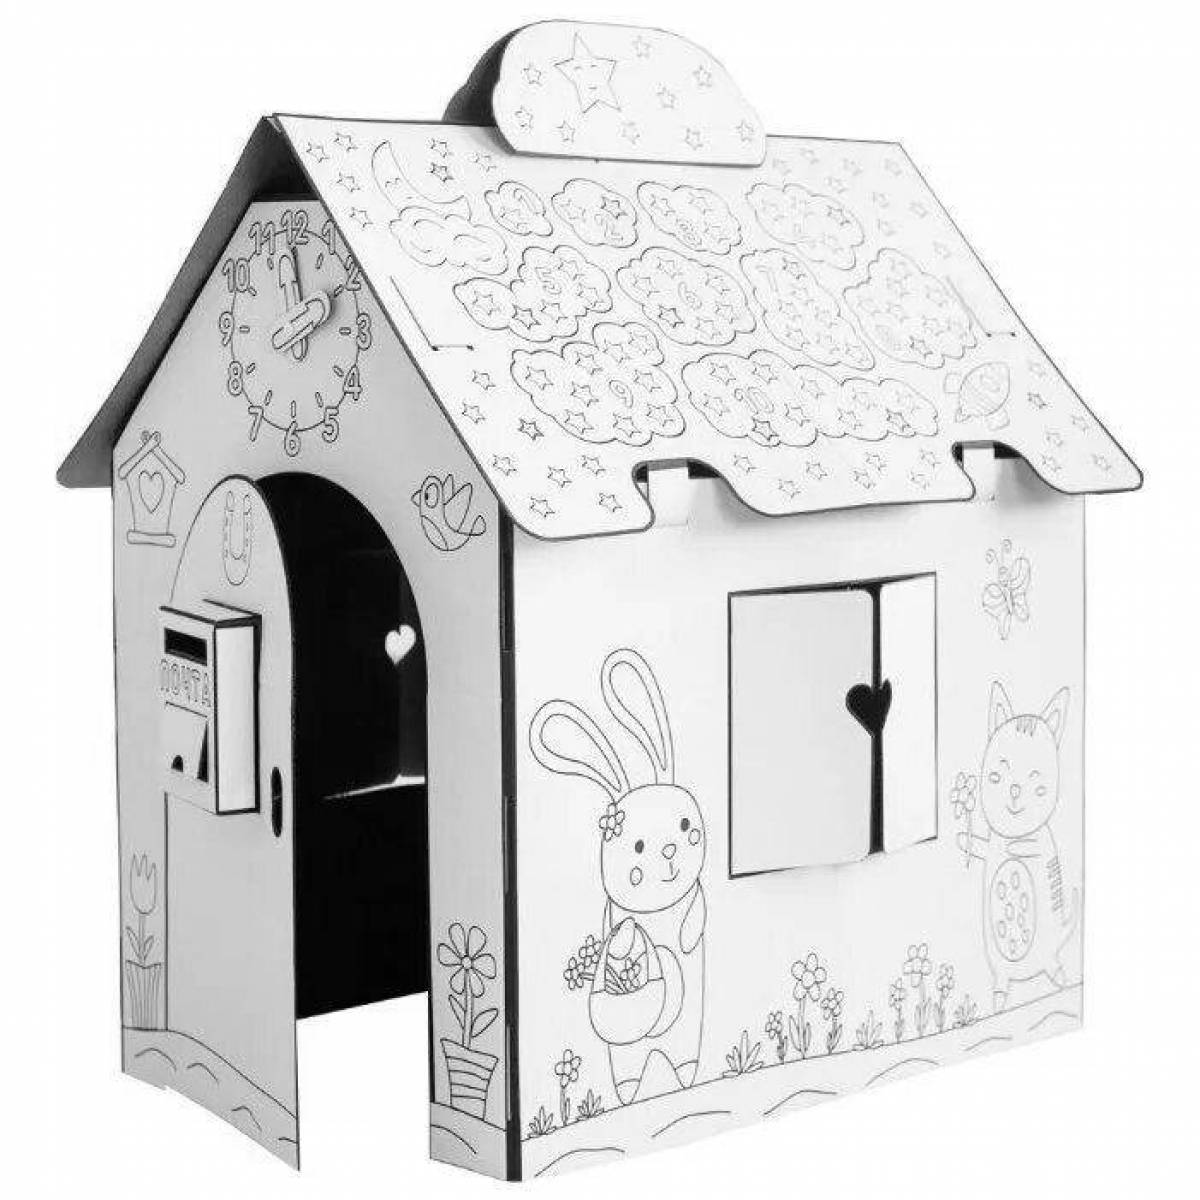 Coloring book cheerful ozone house made of cardboard